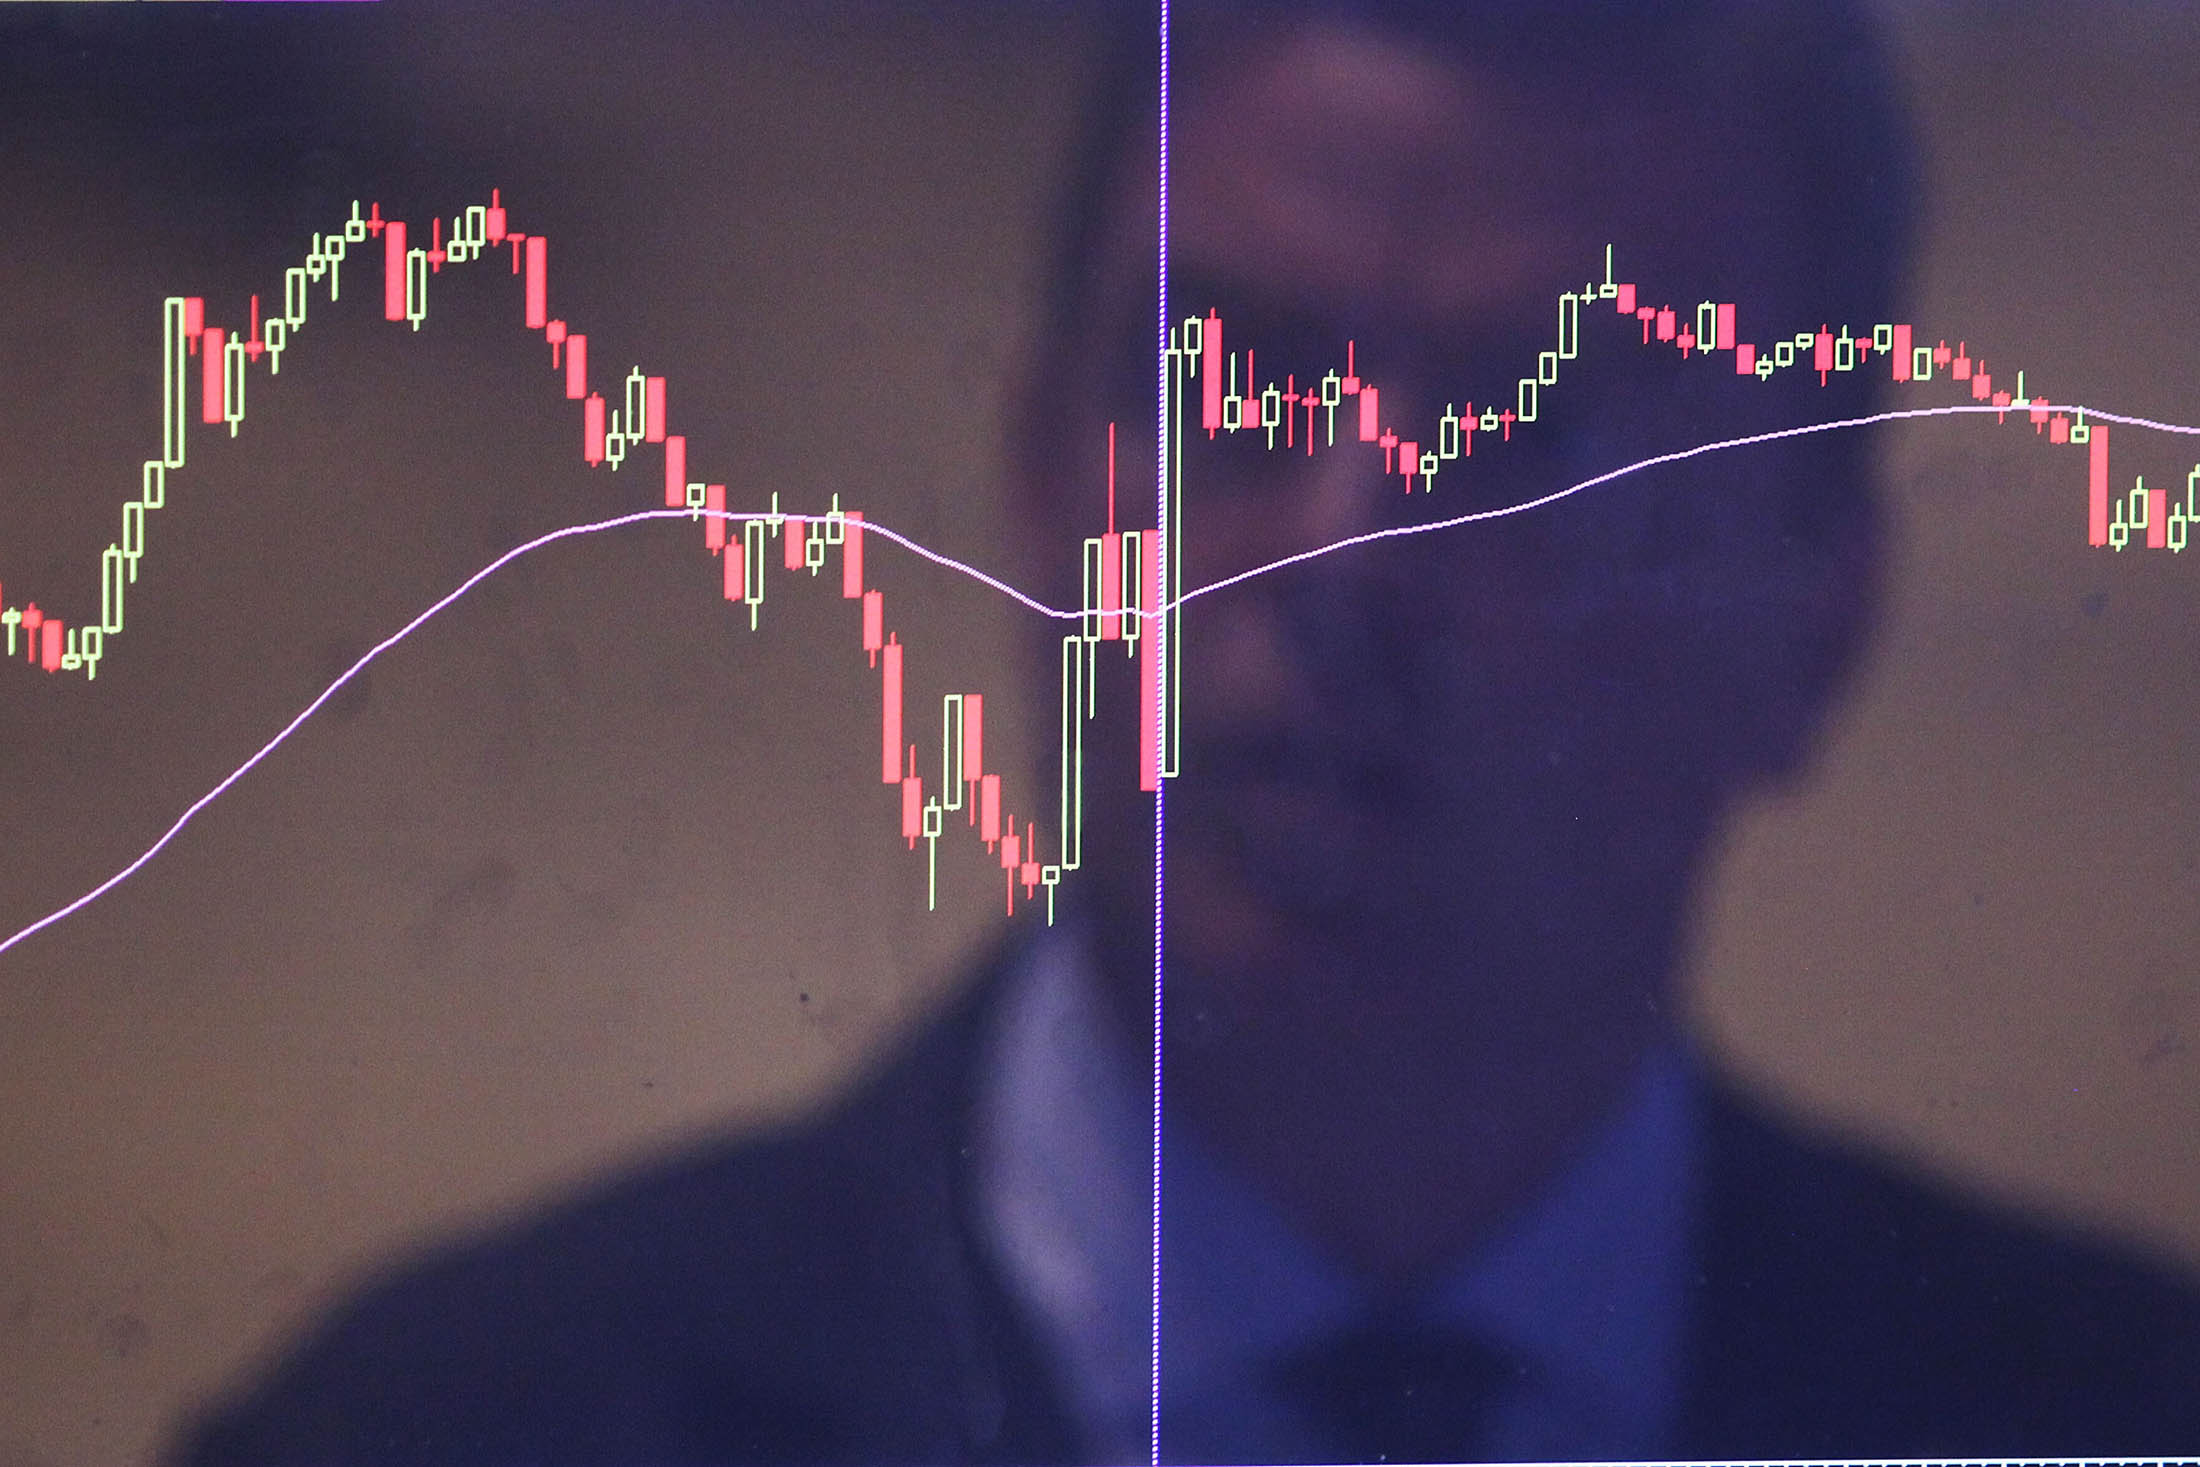 NEW YORK, NY - AUGUST 25: A trader is reflected in a market screen on the floor of the New York Stock Exchange (NYSE) on August 25, 2015 in New York City. Following a day of steep drops in global markets, the Dow Jones industrial average rallied early in the day only to fall over 200 points at the close.
